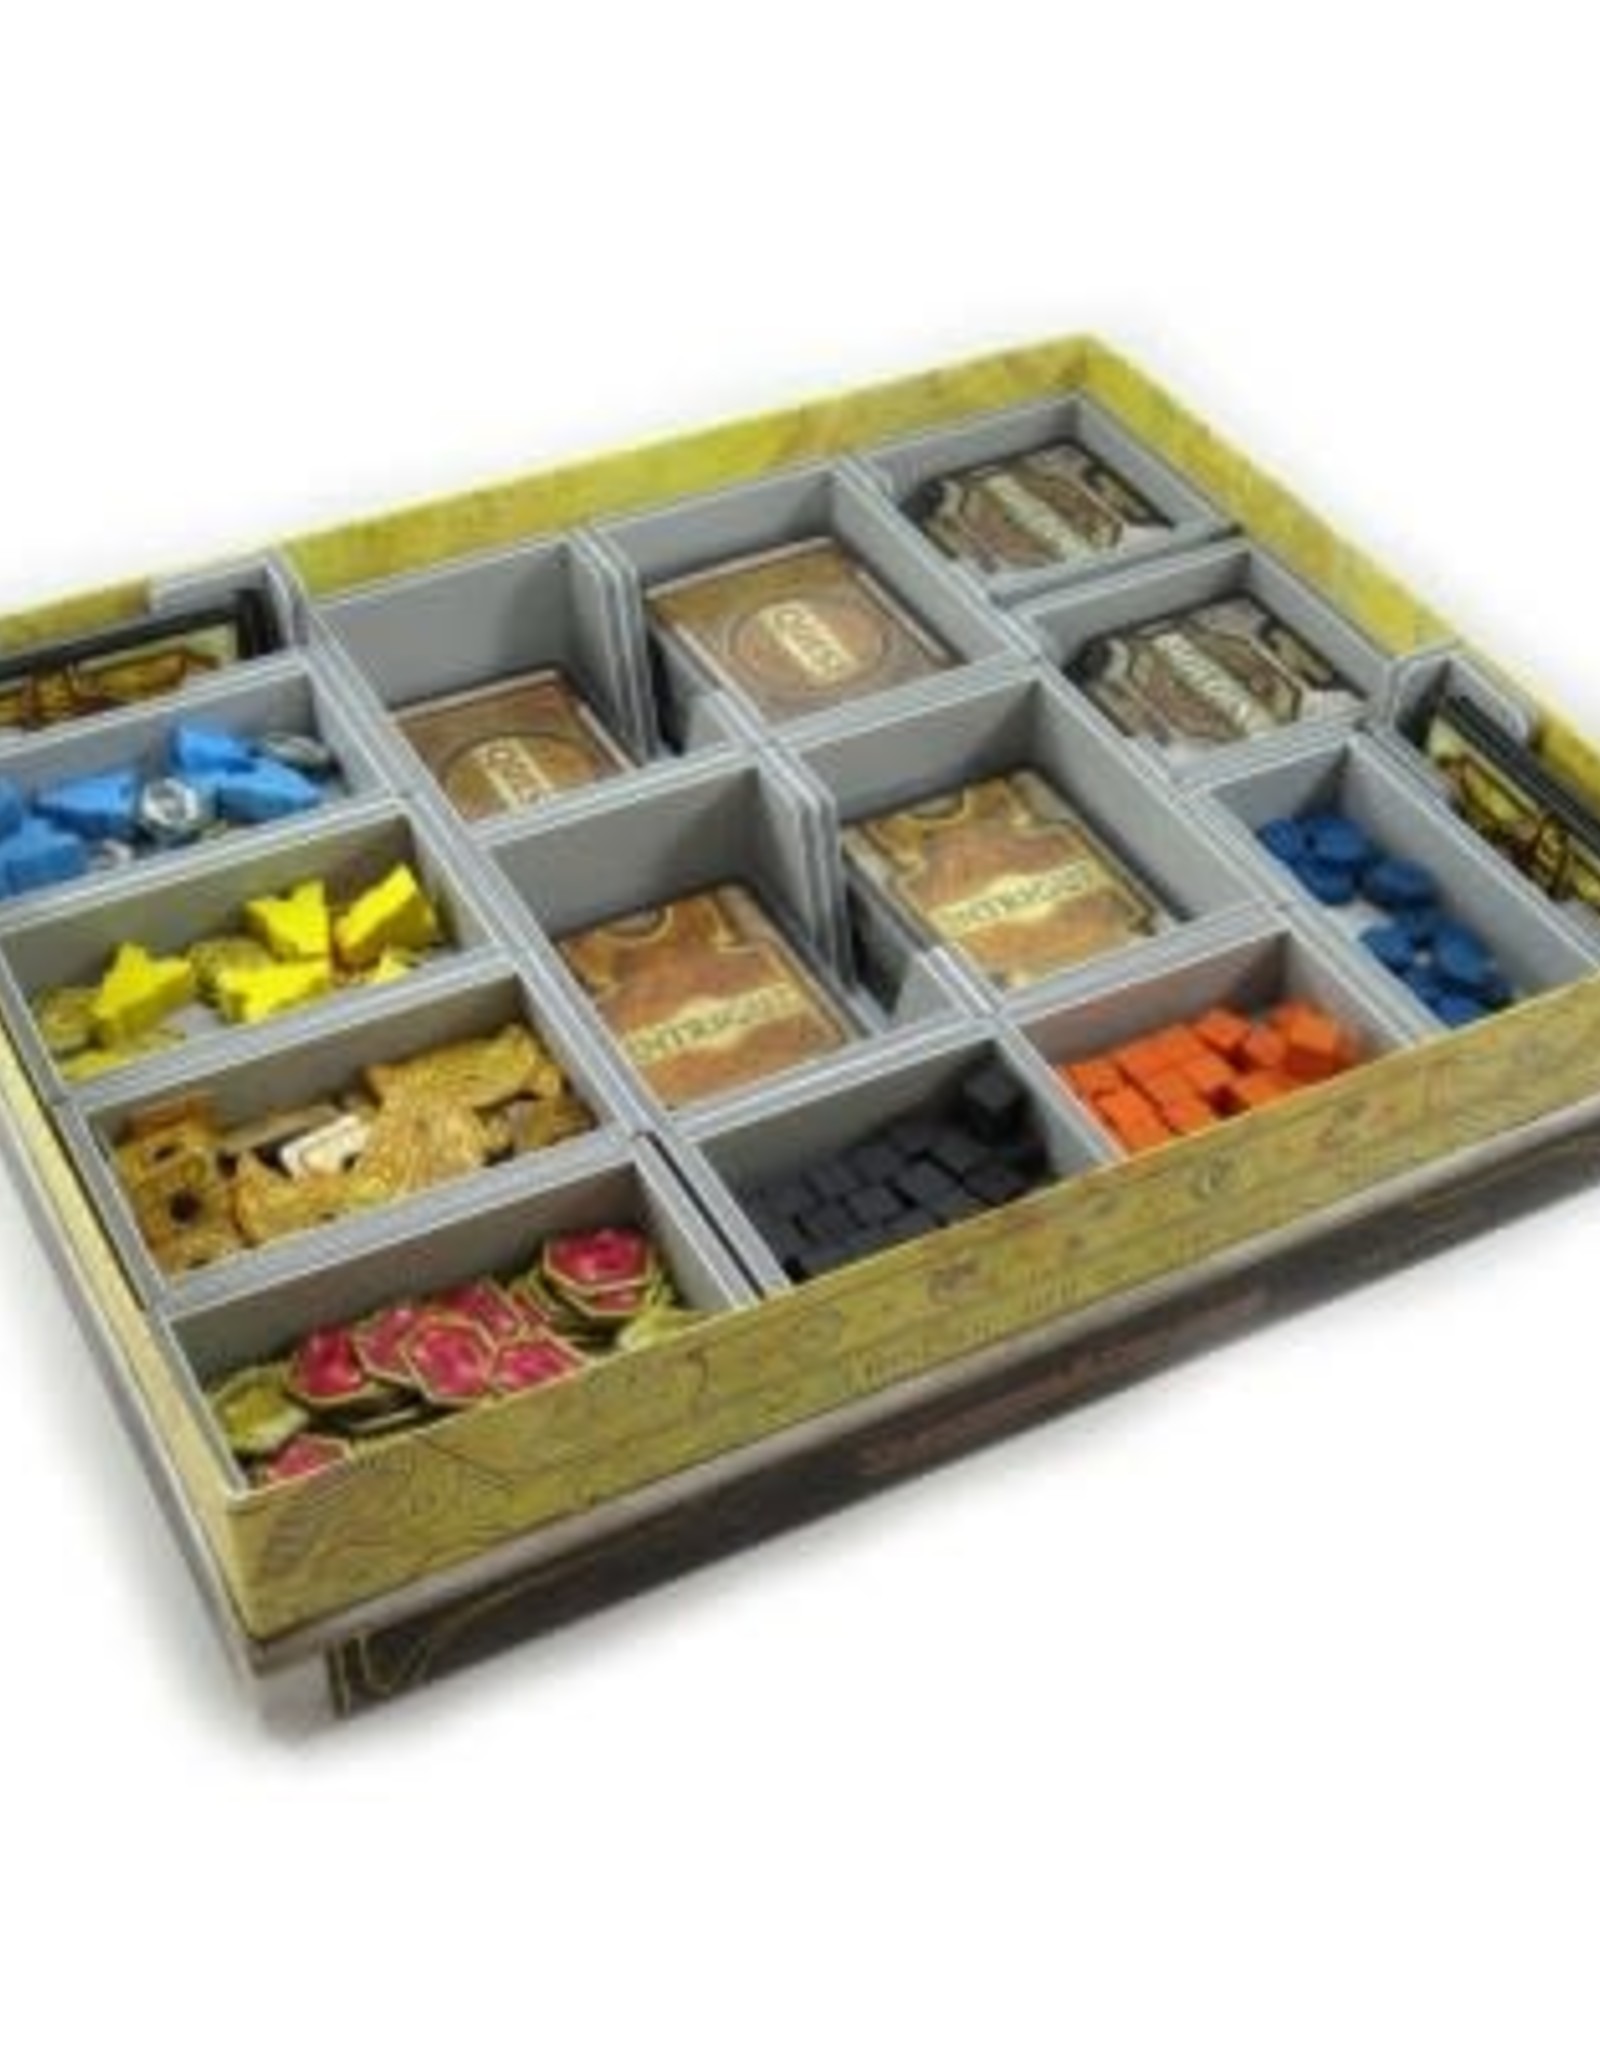 Folded Space Folded Space Box Insert: Lords of Waterdeep